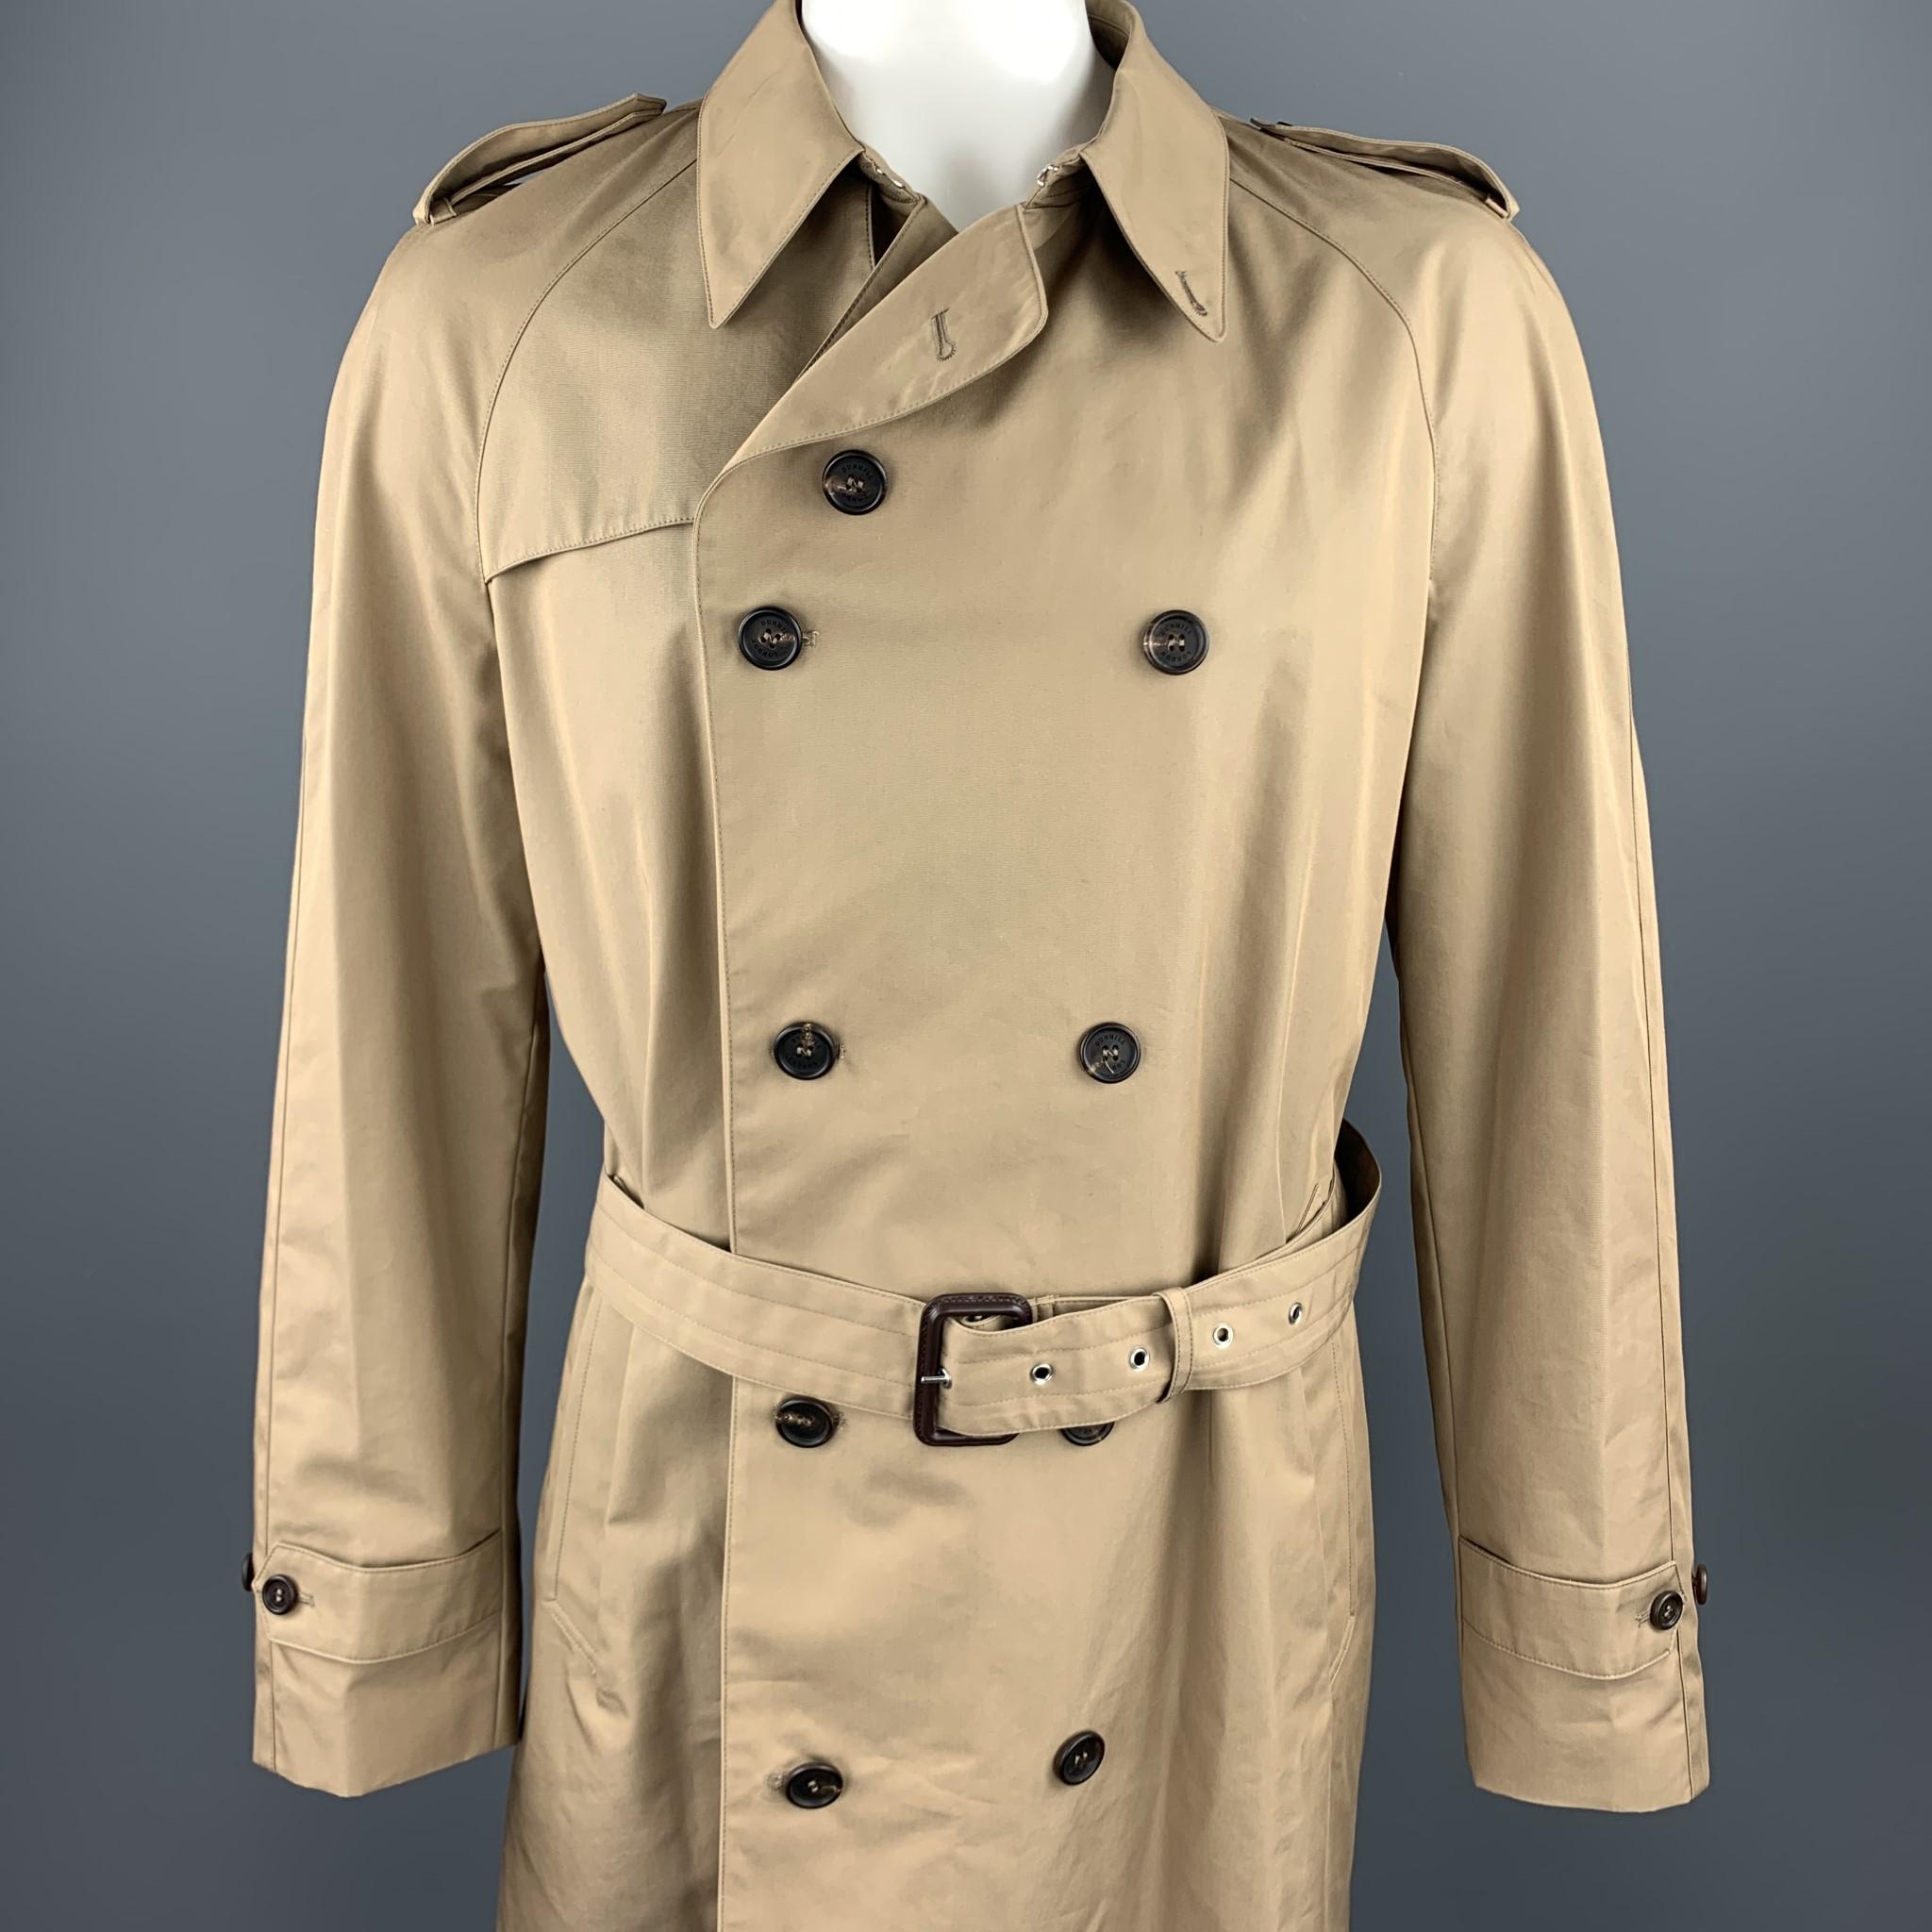 DUNHILL trenchcoat comes in a khaki cotton / polyamide featuring a belted style, epaulettes, and a double breasted closure. Made in Italy.

Excellent Pre-Owned Condition.
Marked: 2X

Measurements:

Shoulder: 18.5 in. 
Chest: 52 in.
Sleeve: 27.5 in.